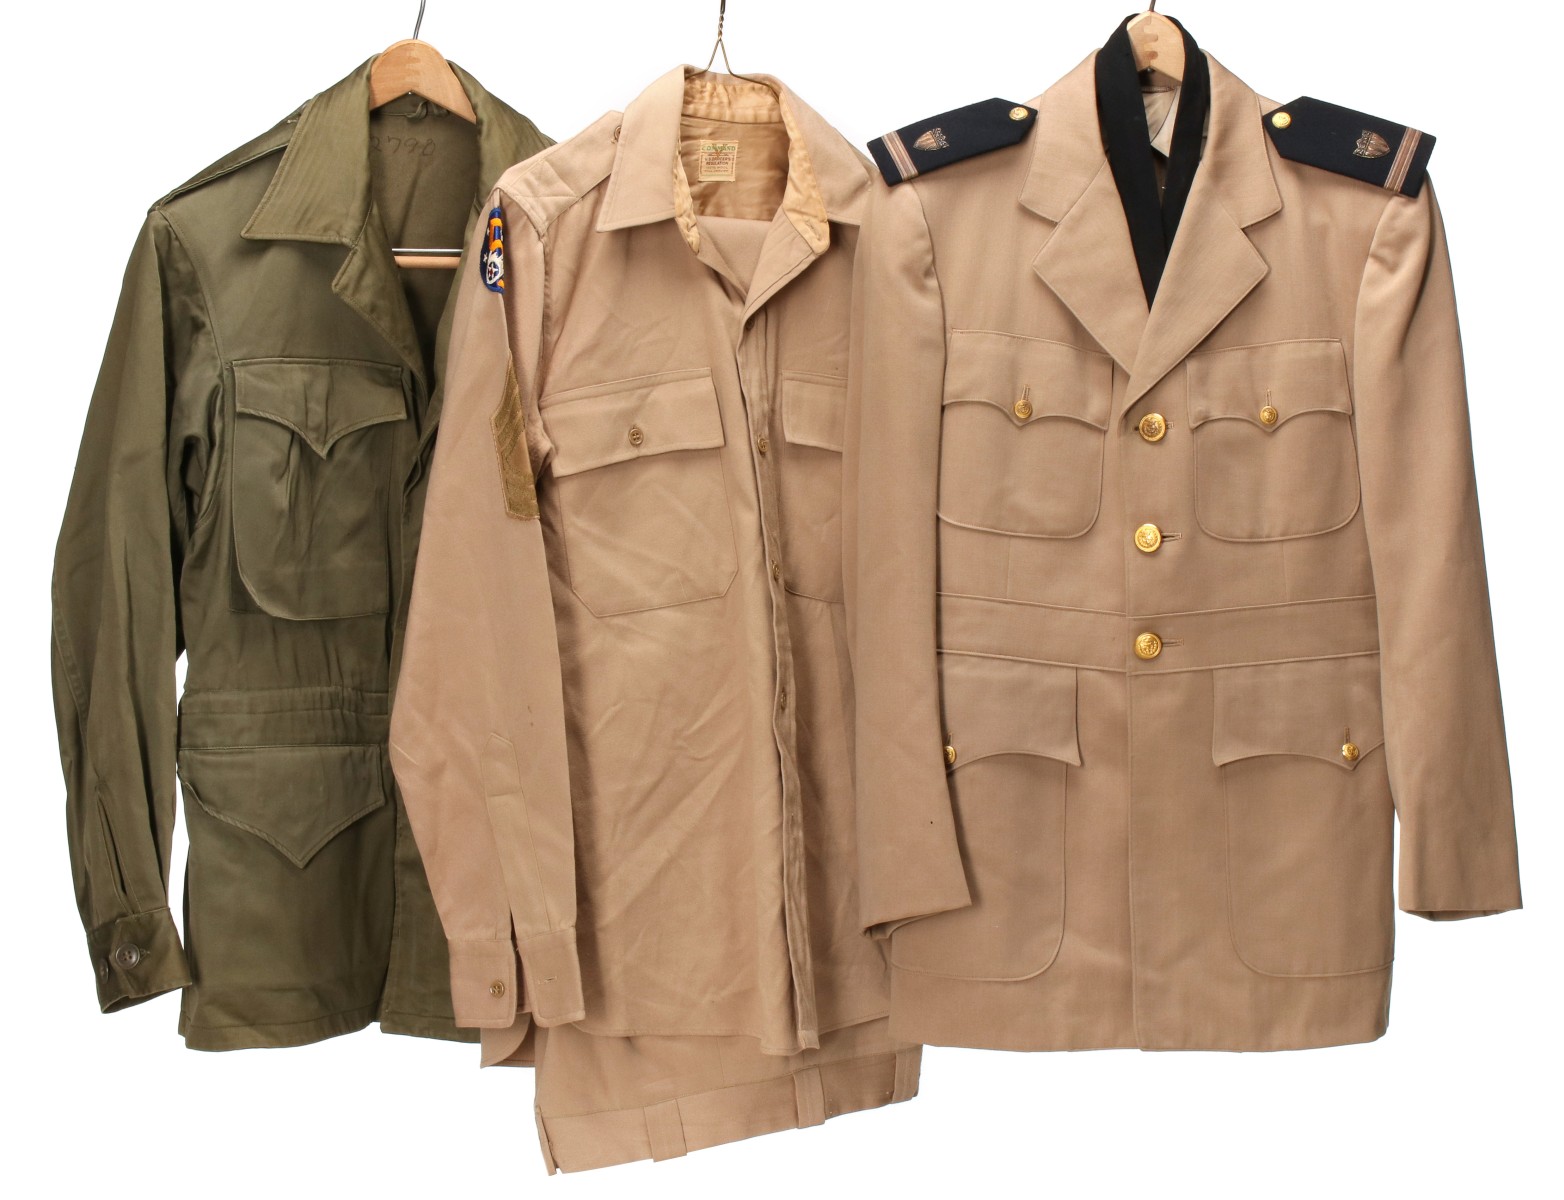 ARMY, AAF, COAST GUARD, USMC AND OTHER WWII UNIFORMS